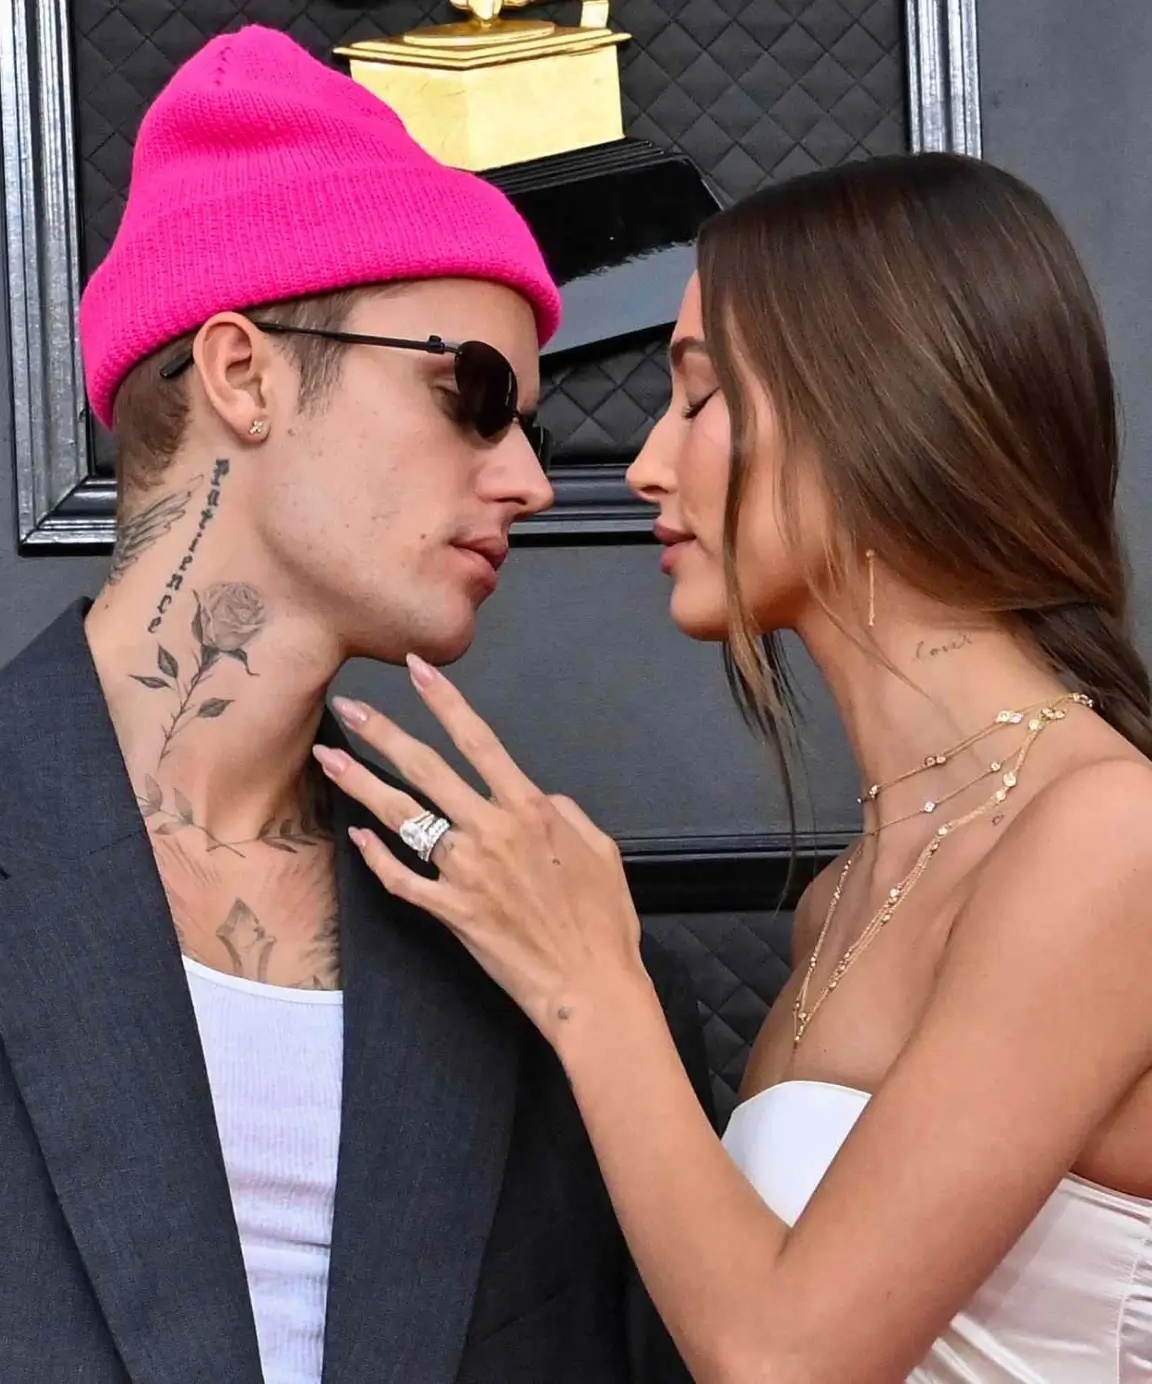 All To Know About Hailey Bieber’s Engagement Ring!